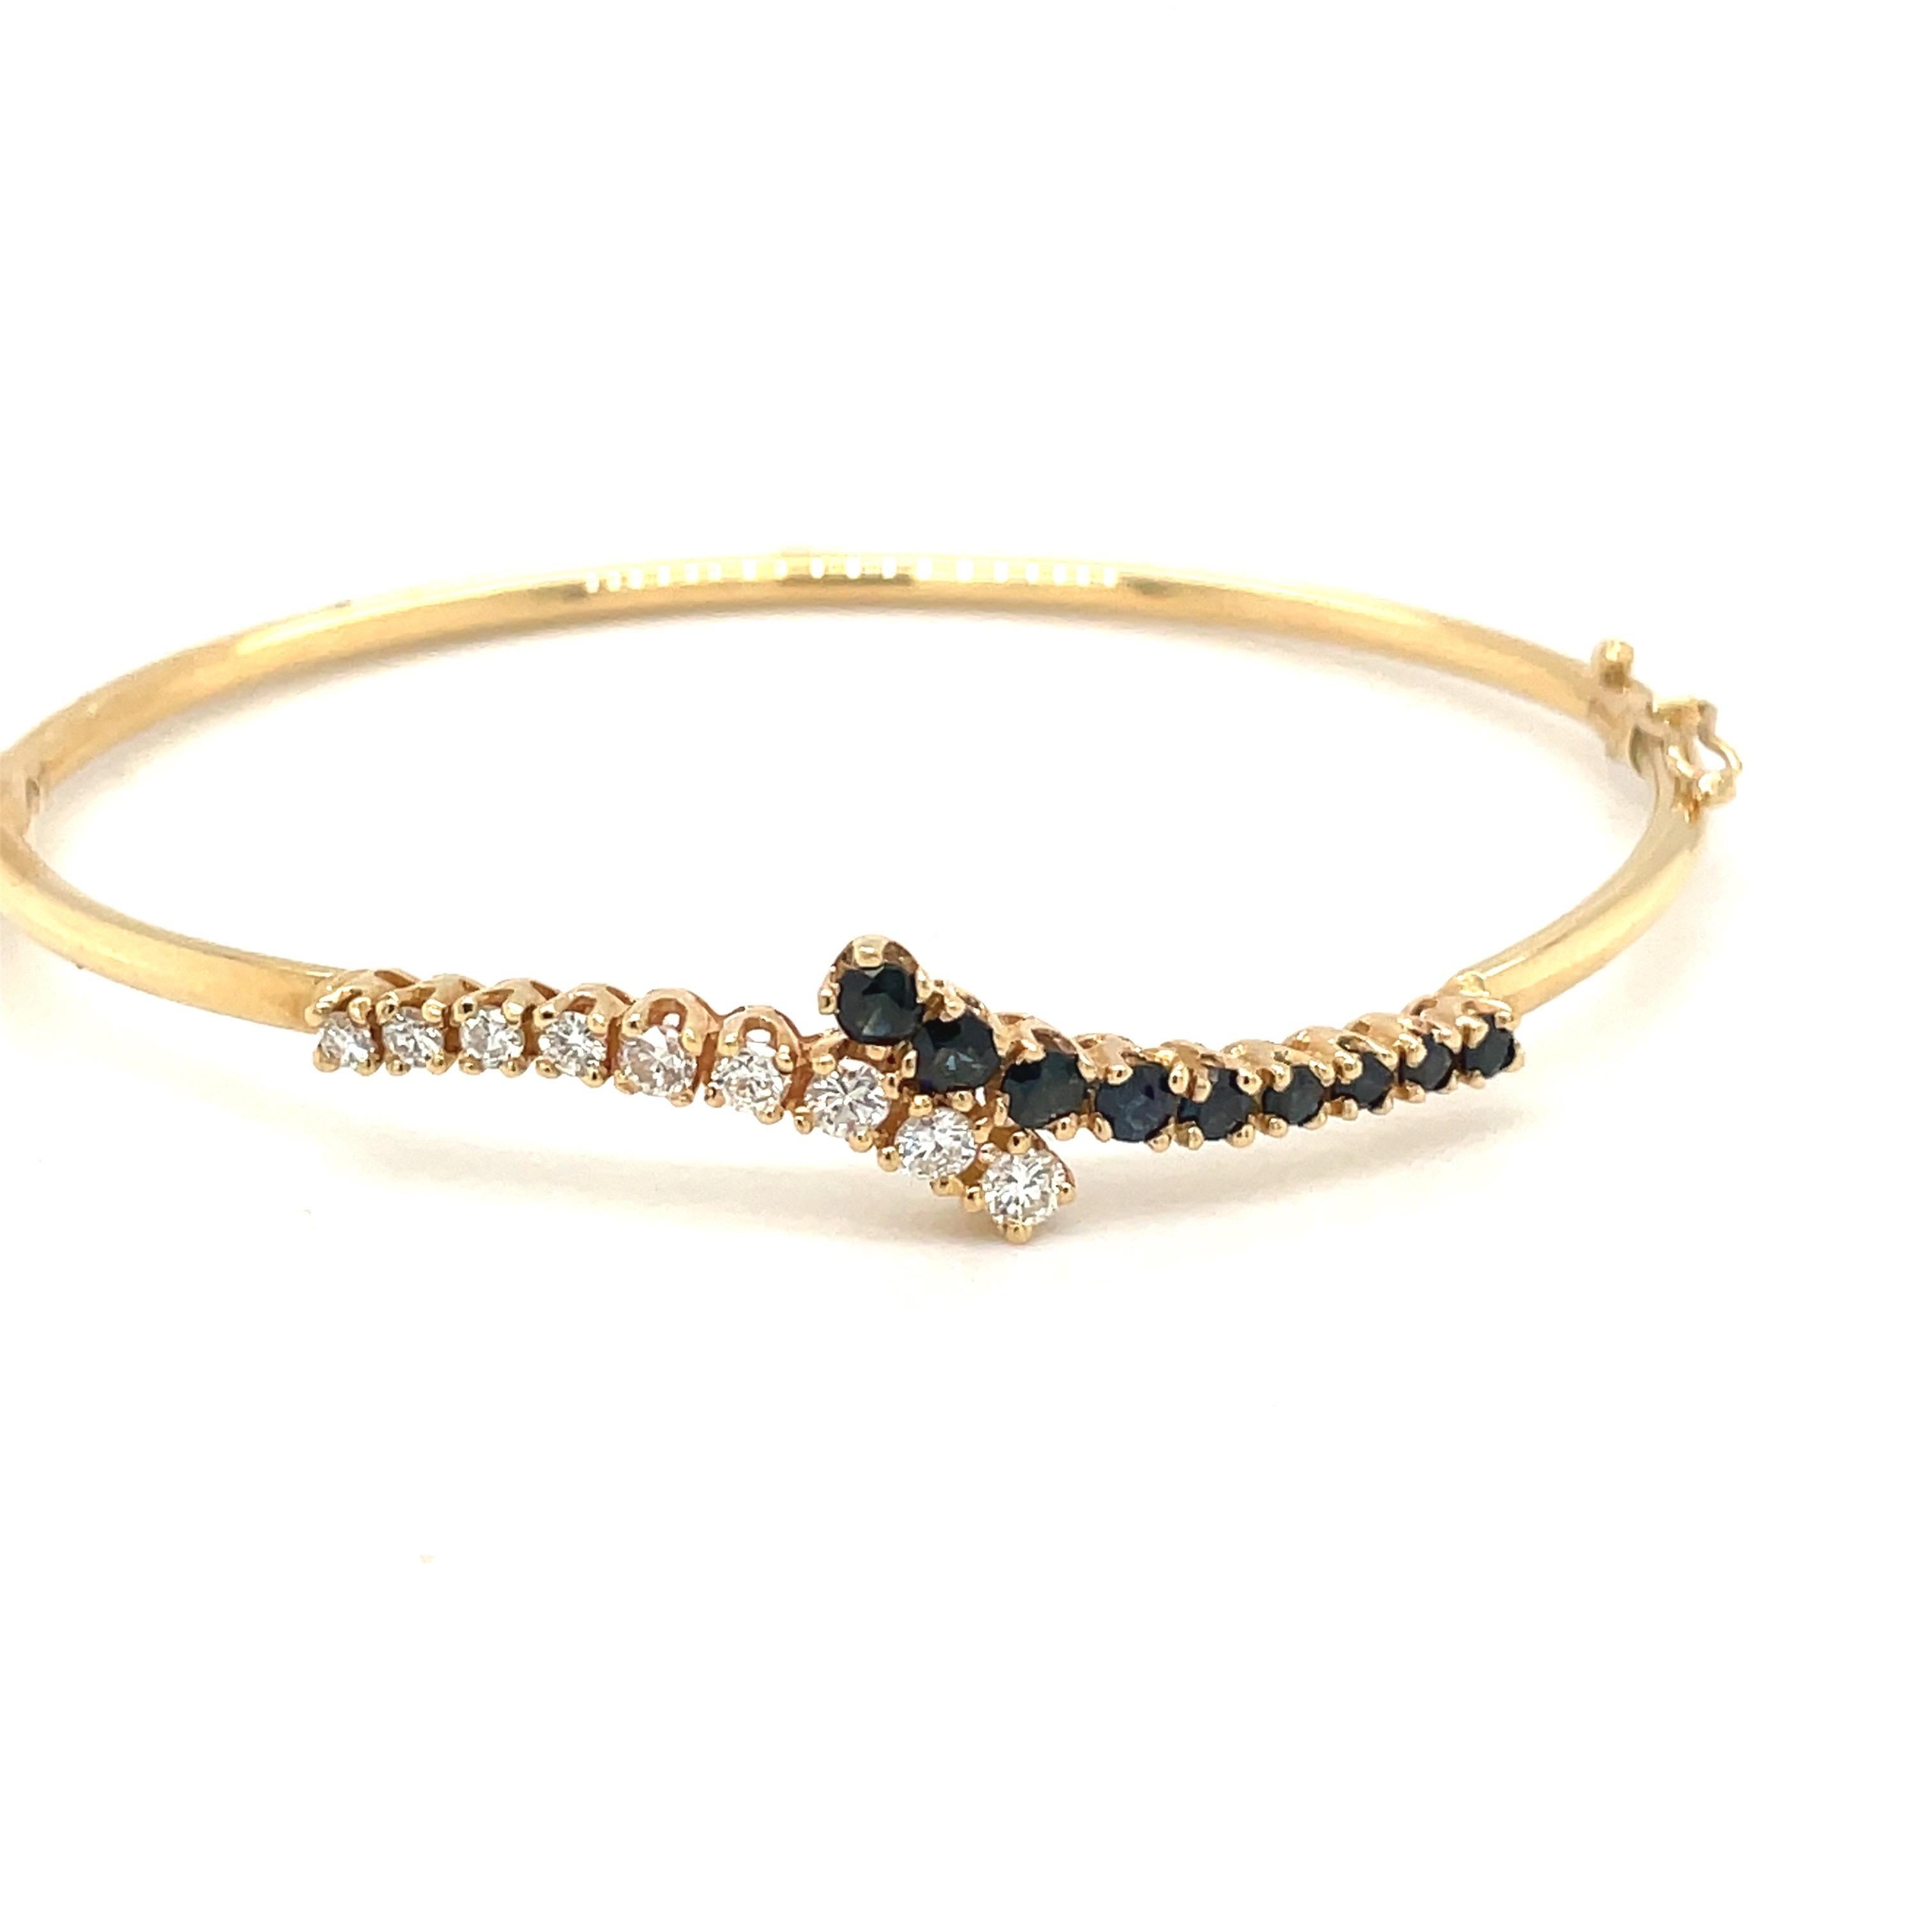 14 karat yellow gold bangle bracelet set with a single row of round diamonds and a single row of blue sapphires. The hinged bracelet measures 2.5